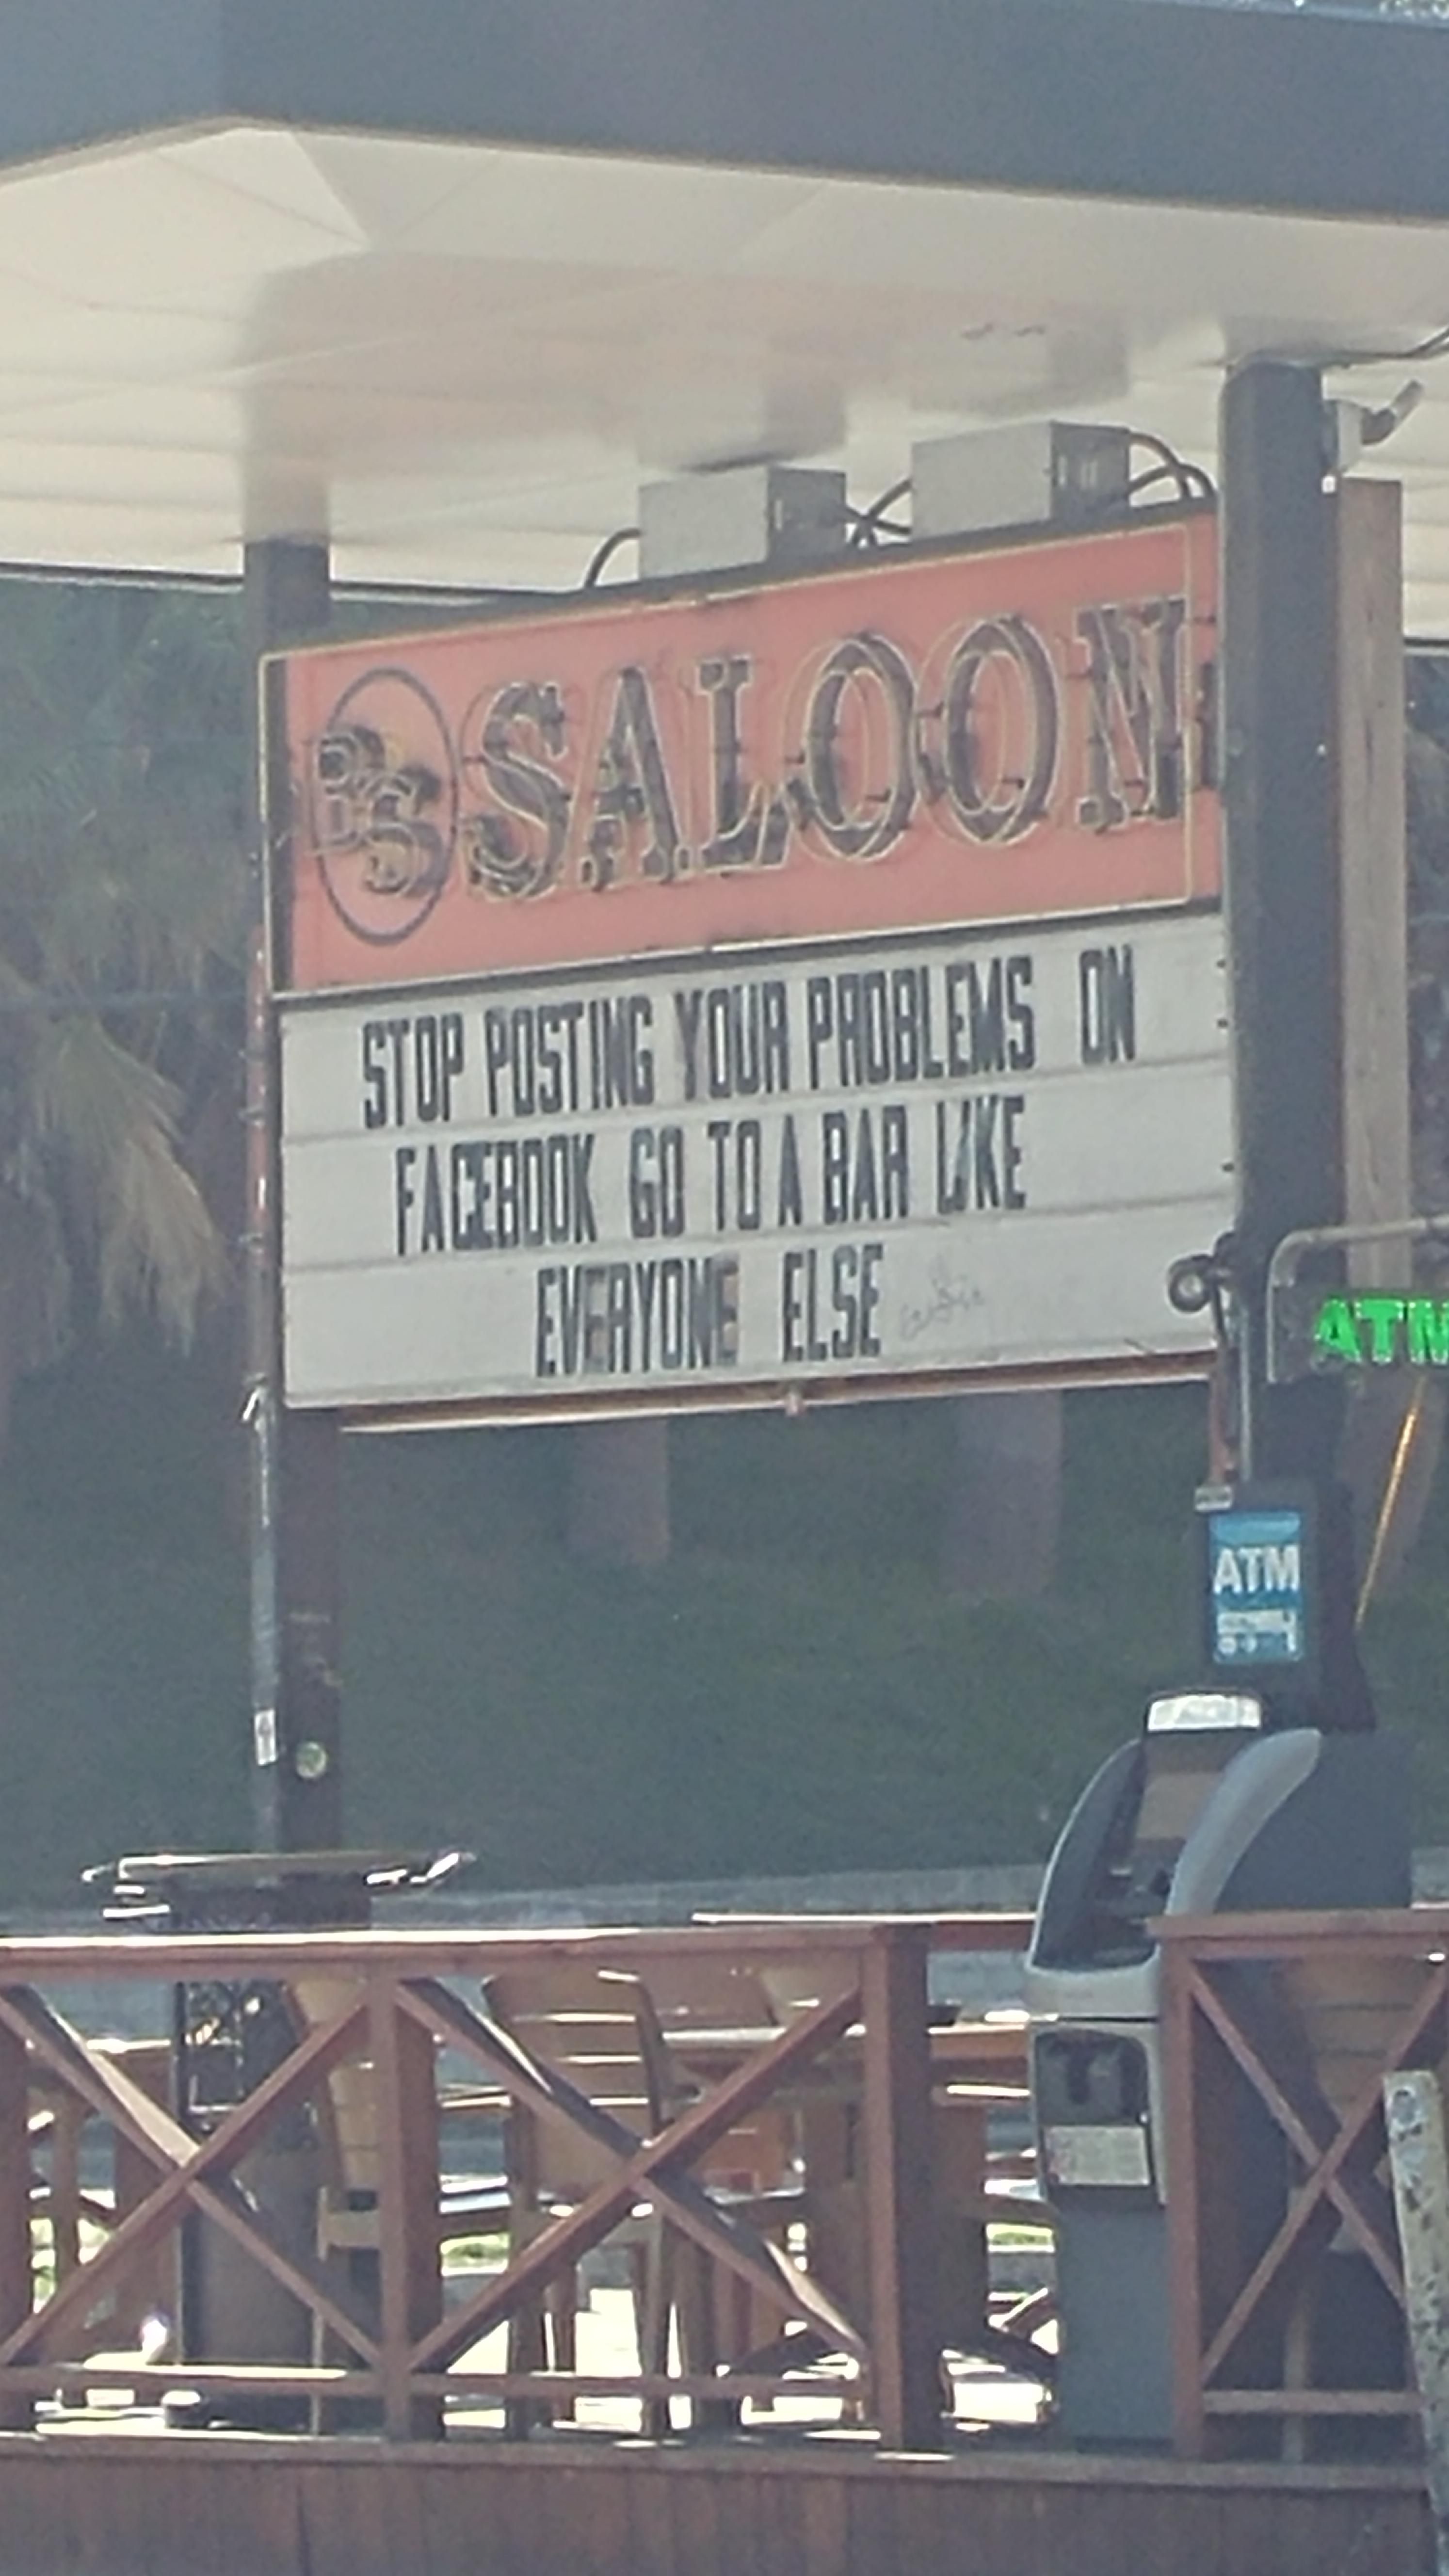 Passed this on the way to work in Austin, TX